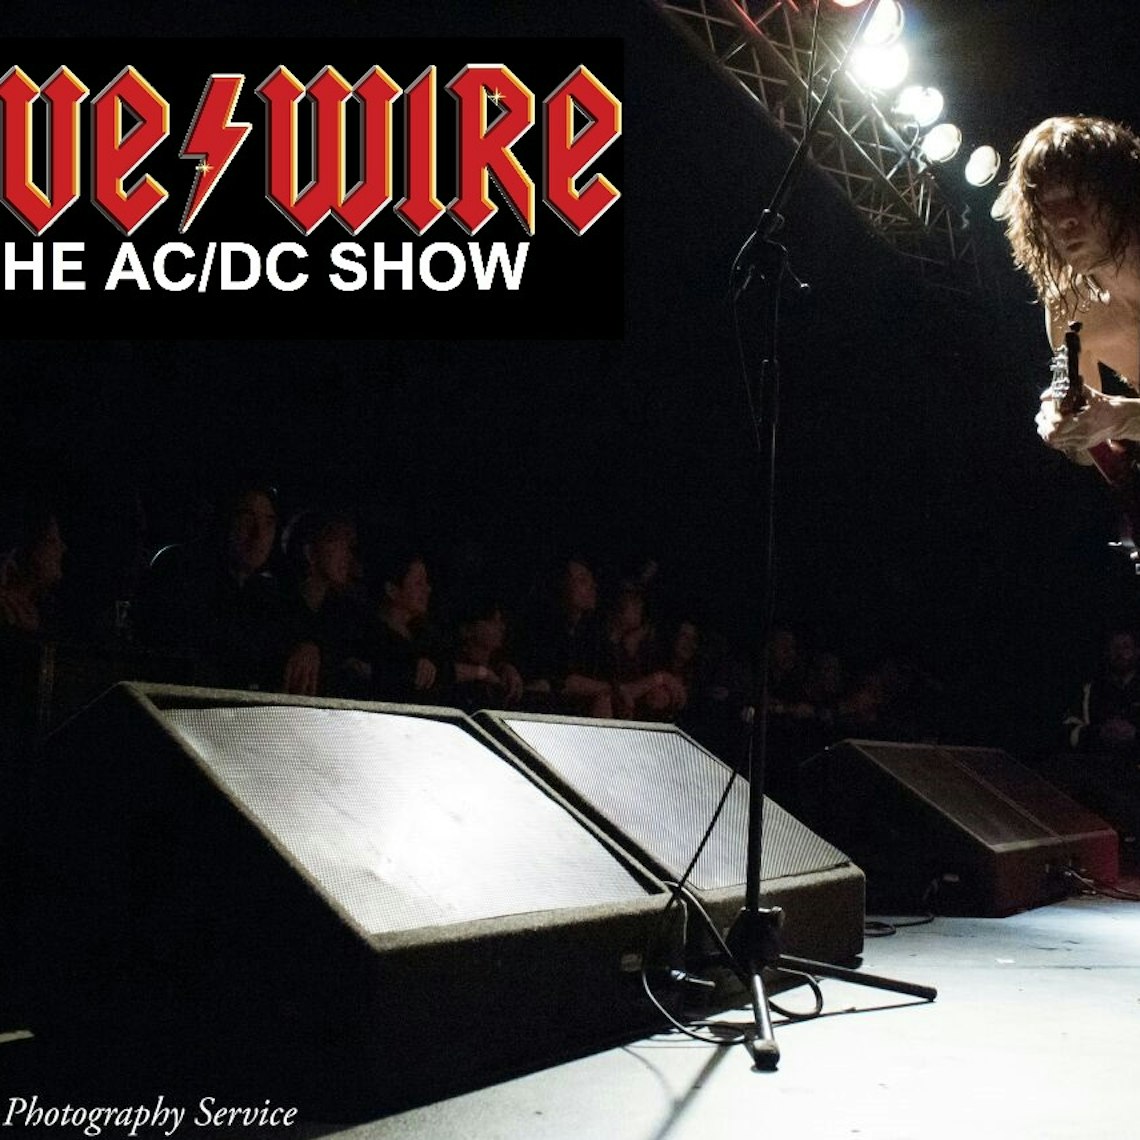 Chesterfield Theatres - Livewire - The AC/DC Show